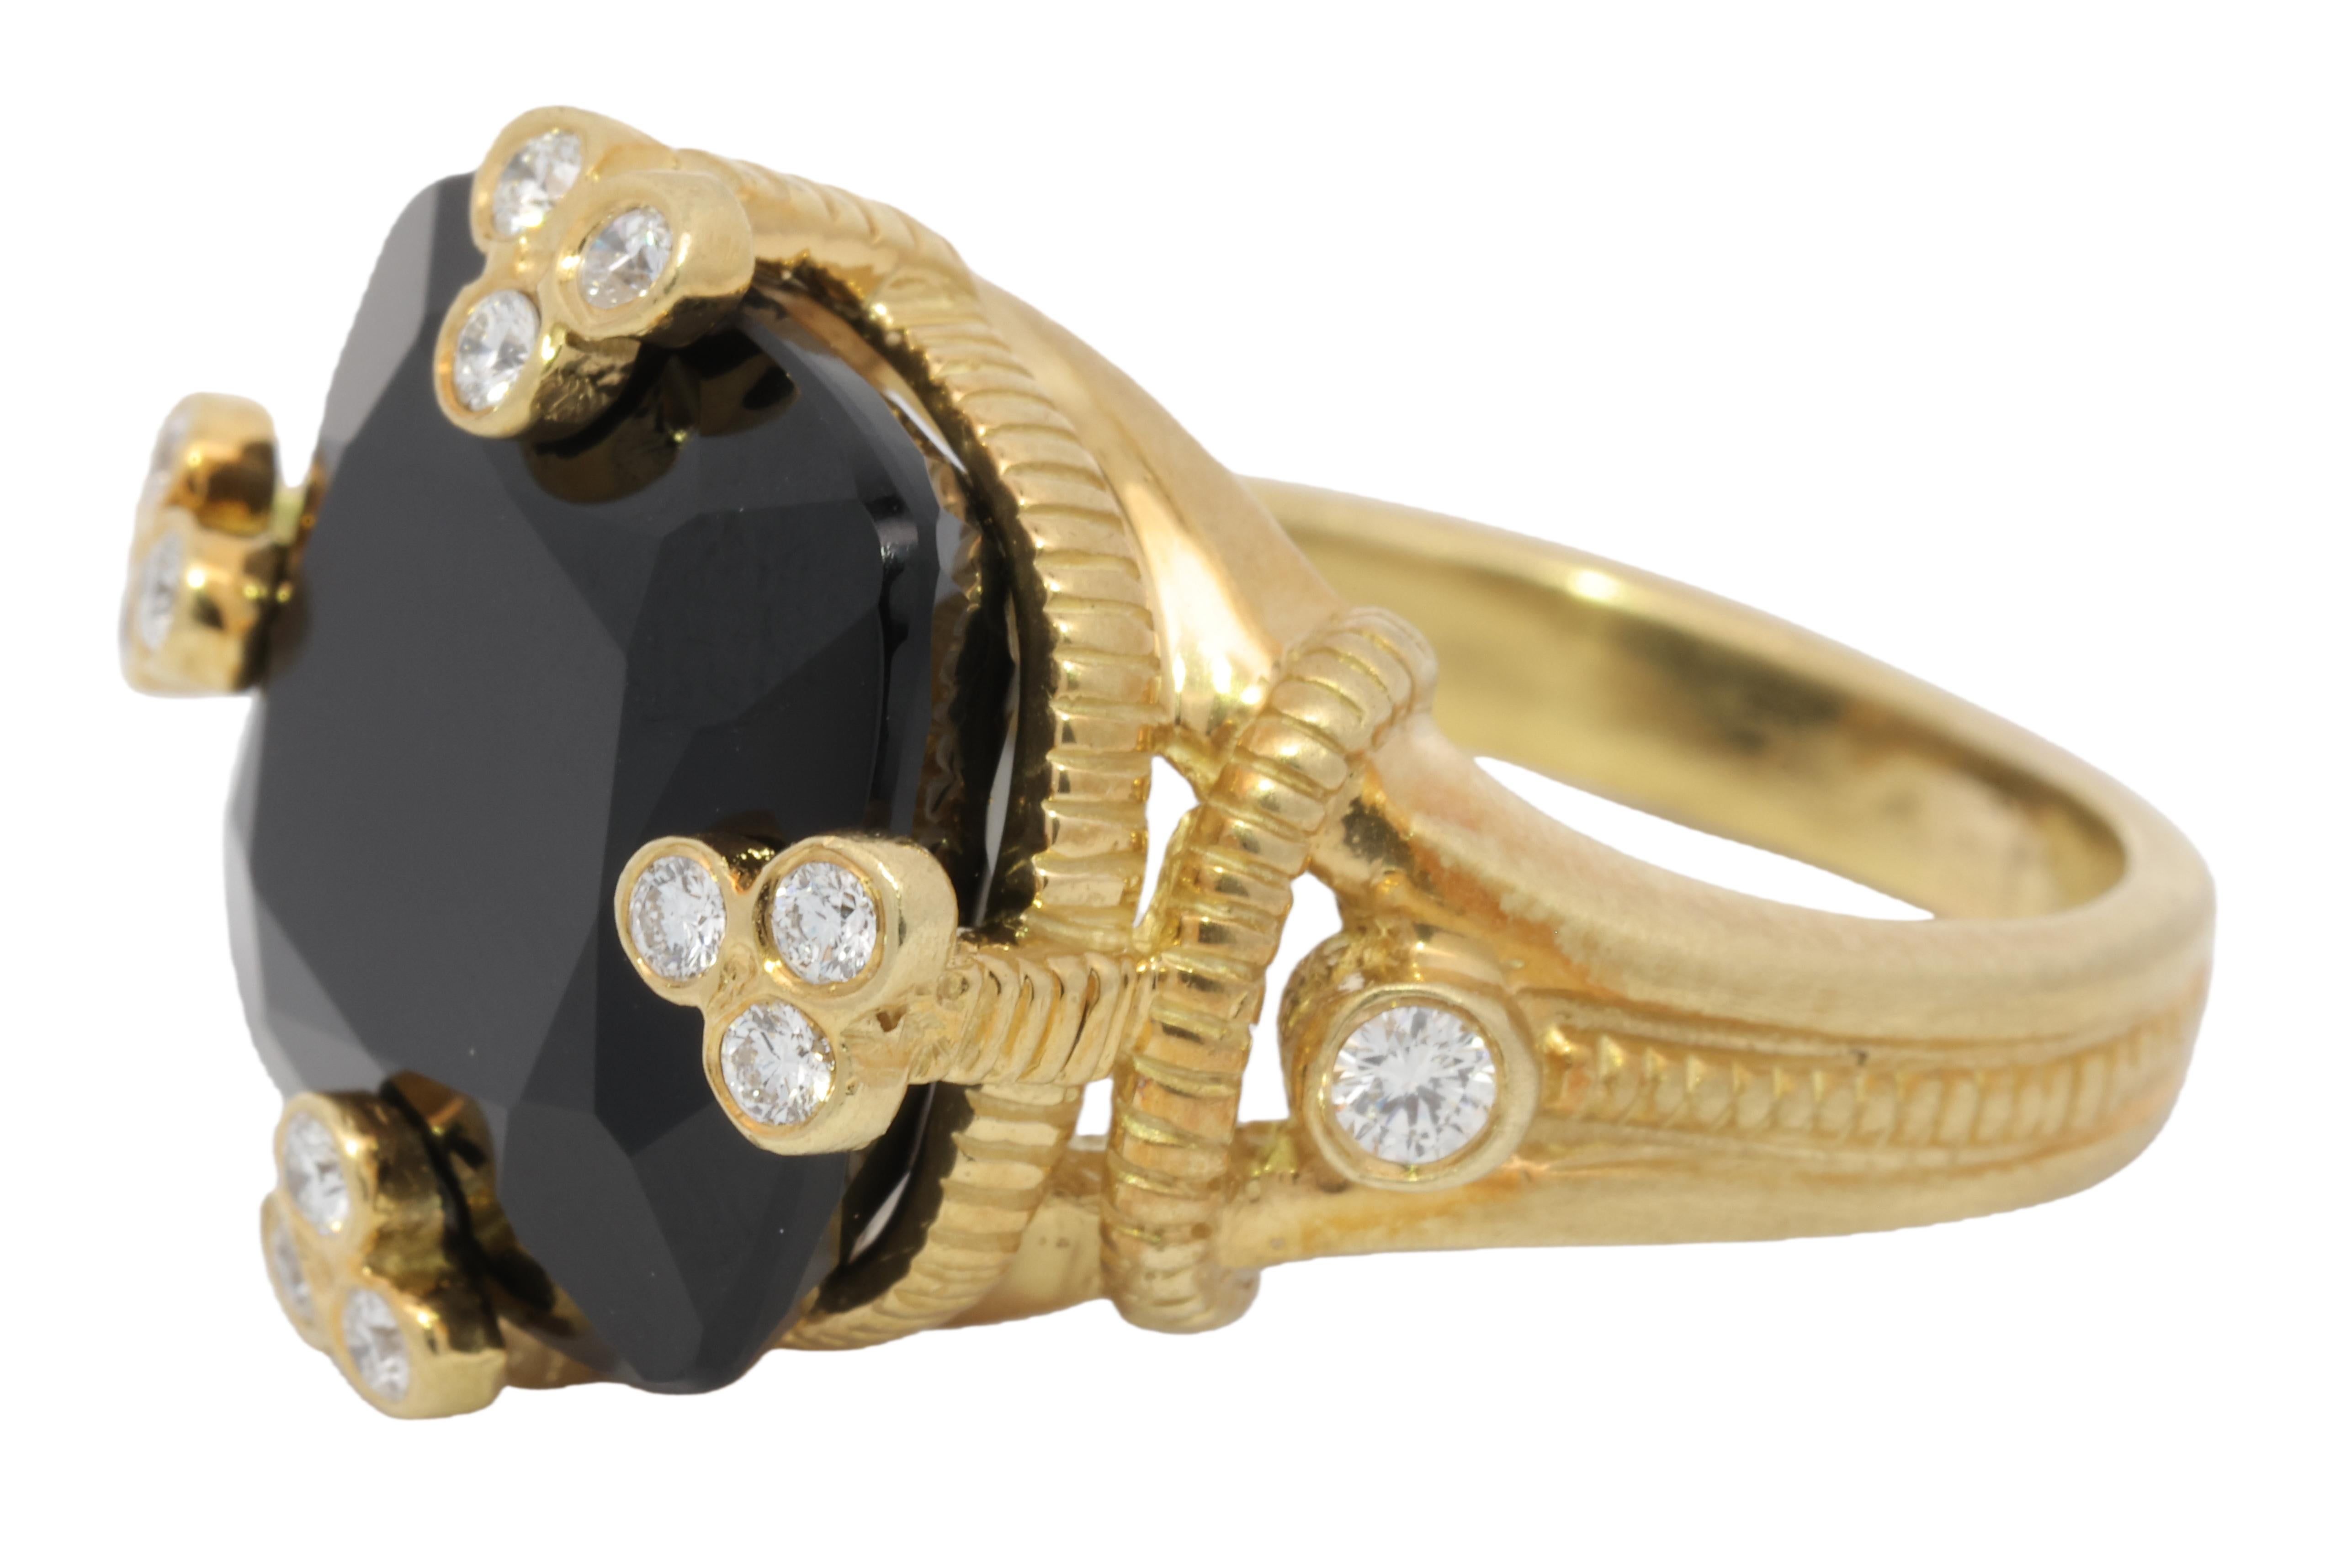 Ring size: 5.5

Absolutely gorgeous Judith Ripka onyx and diamond cocktail ring. A true embodiment of timeless sophistication, this masterpiece seamlessly blends sophistication and boldness, showcasing the designer's impeccable taste and